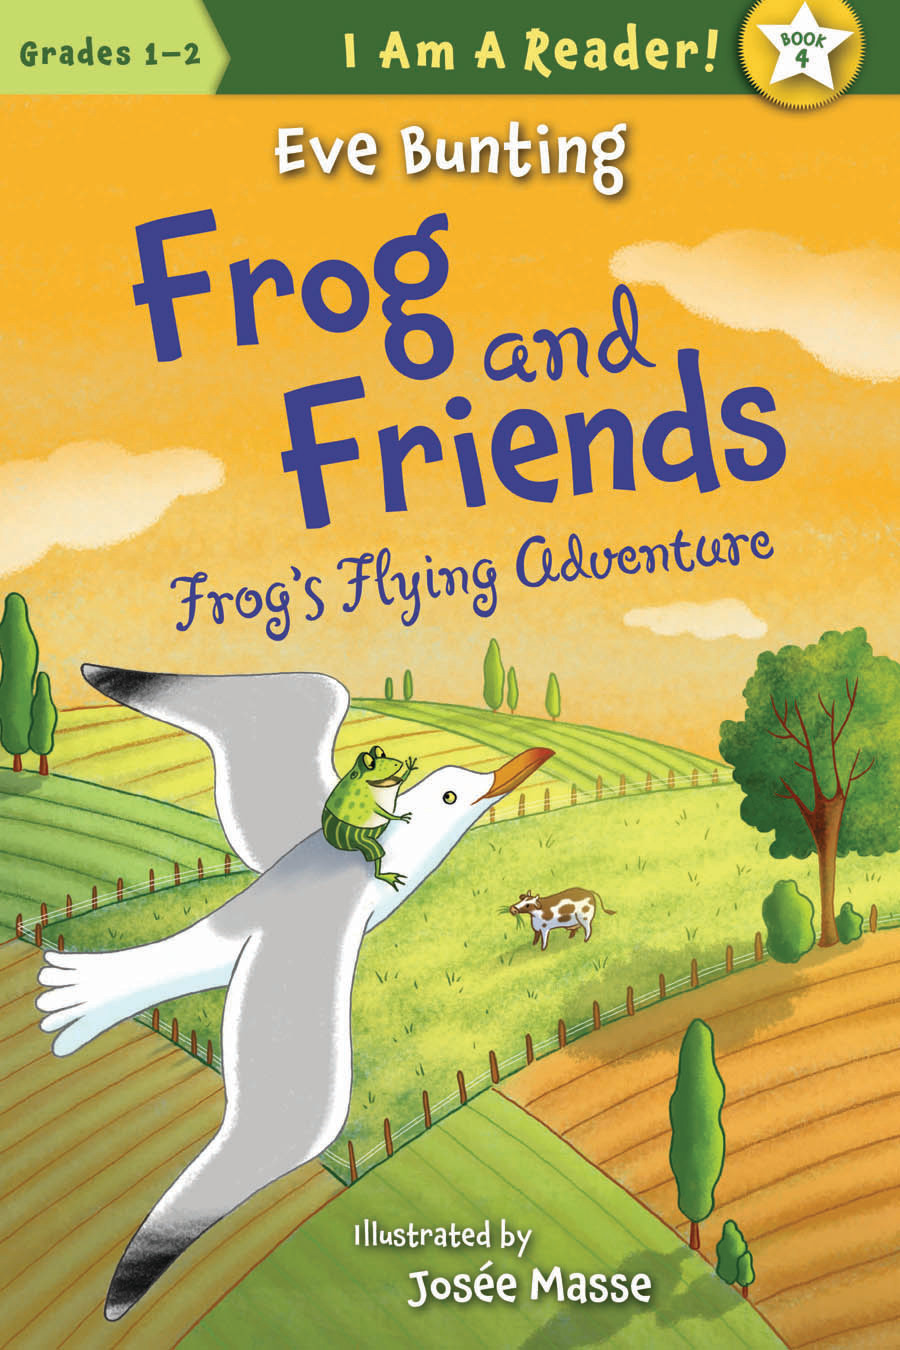 Frog's Flying Adventure (2012) by Eve Bunting